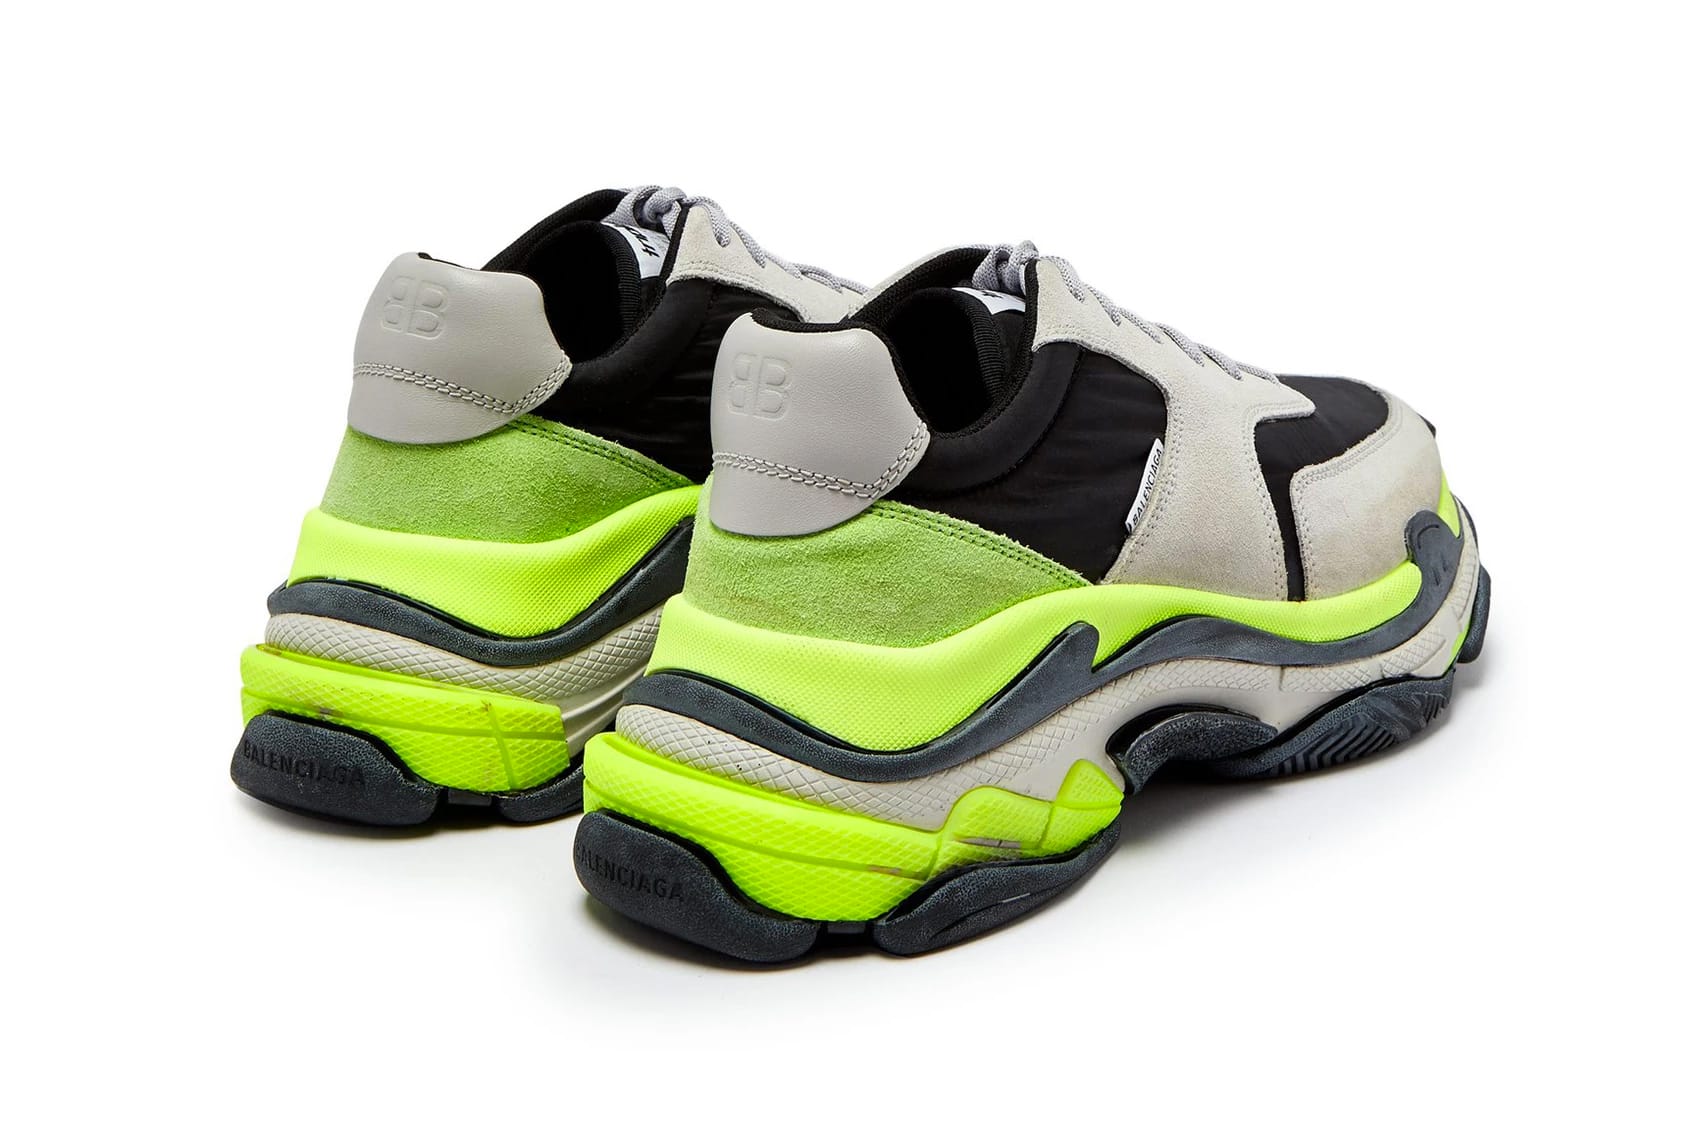 How to get Balenciaga Triple S Trainers White shoes in 2019